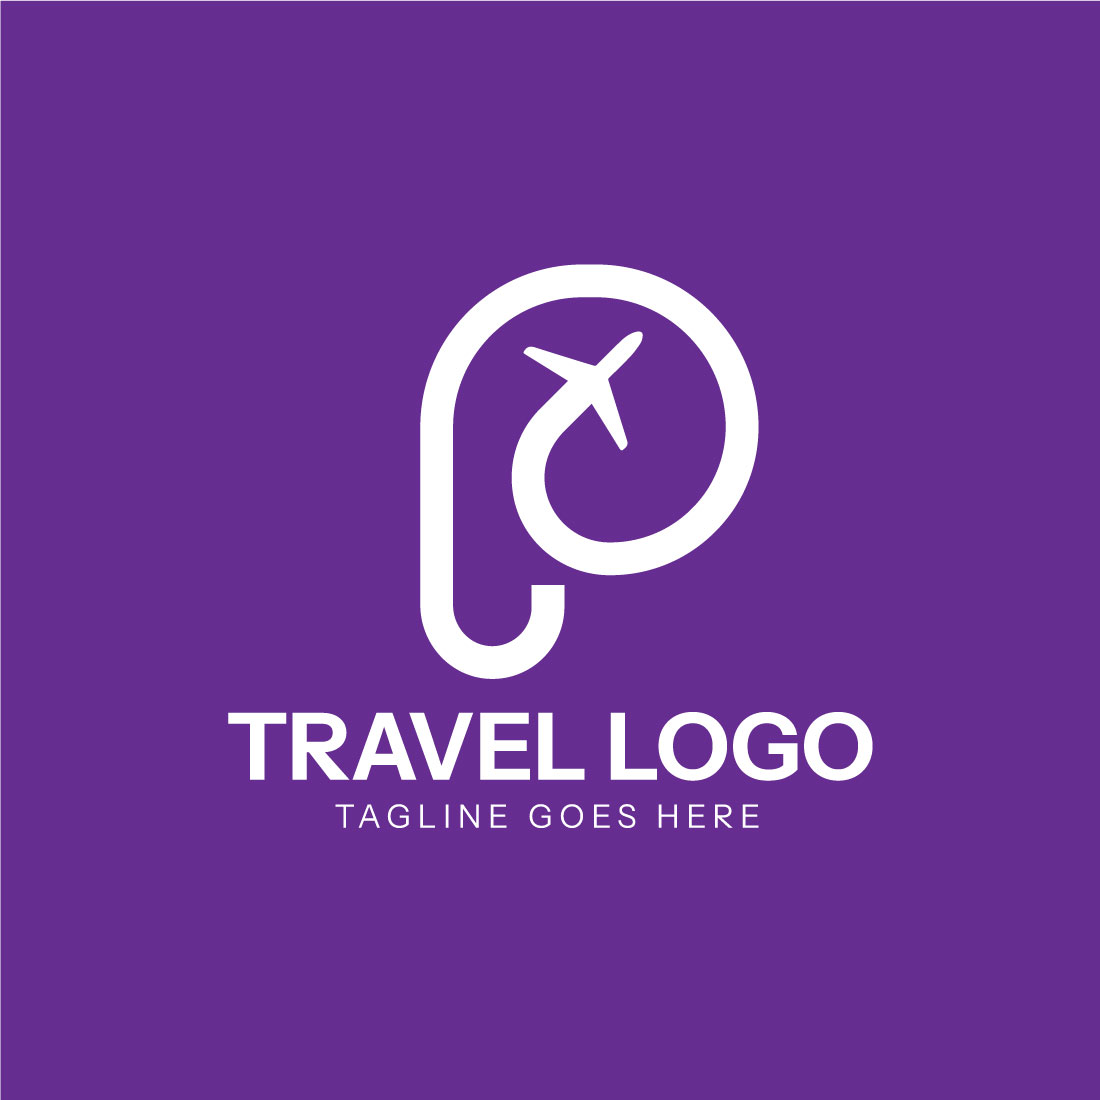 Flat modern travel logo design with letter “P” Simple Airplane logo cover image.